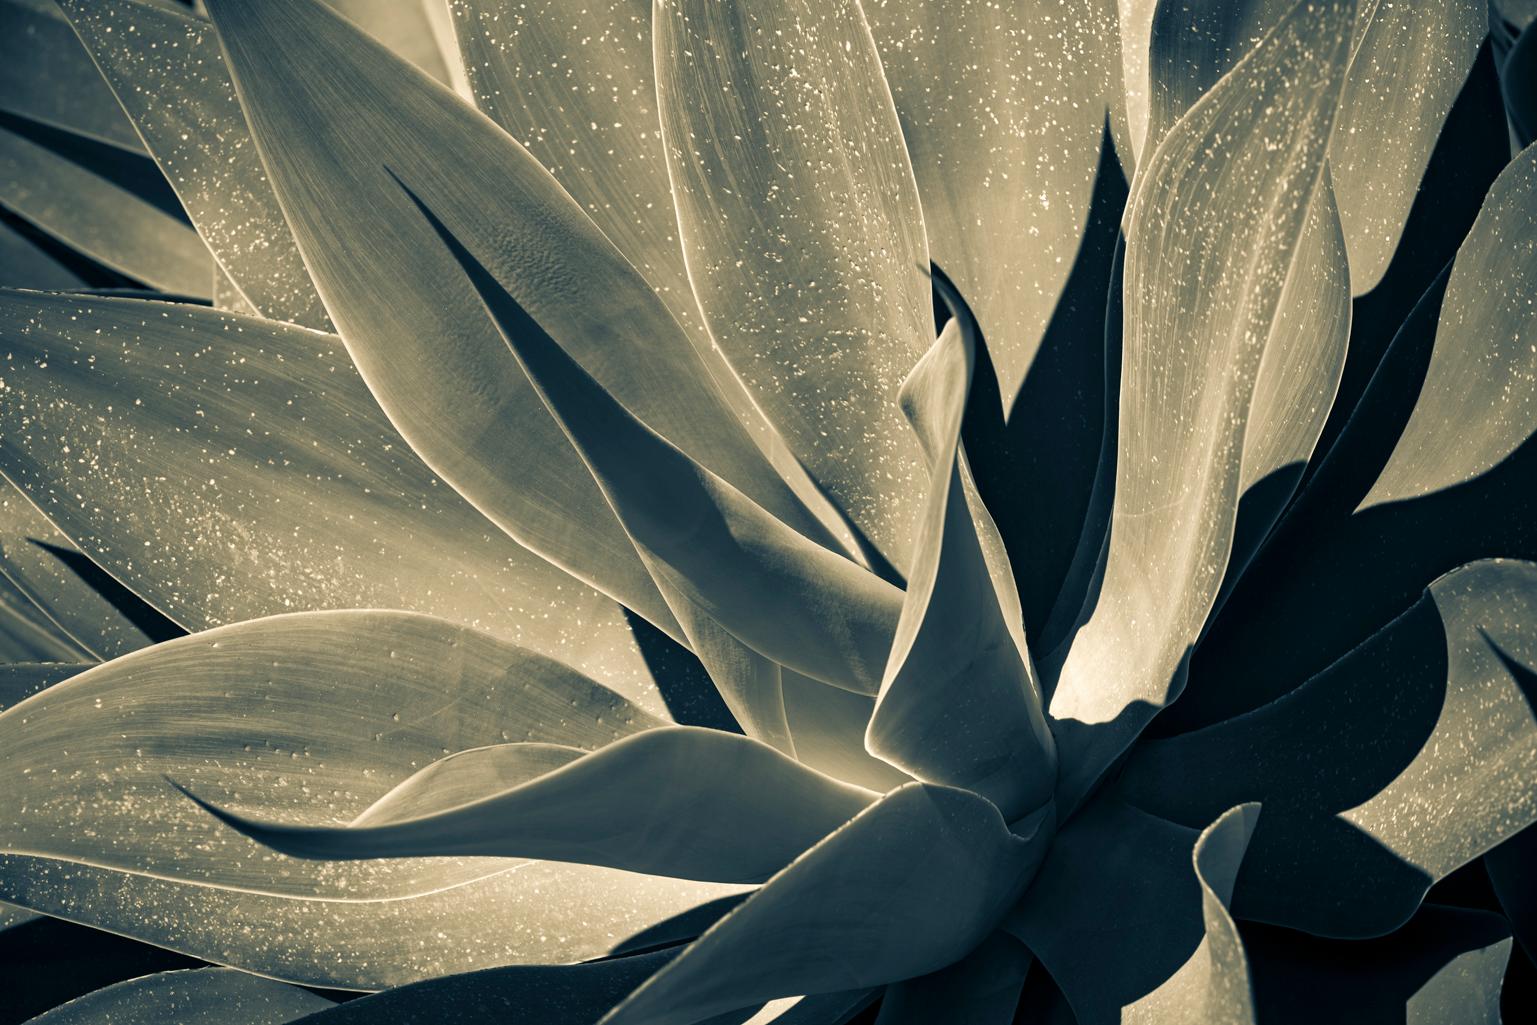 Yucca, Agrigento, Sicily, Italy, 2017. Edition of 15.
One of several in this series of photographs of “Yucca” plants taken on a recent photo excursion to Sicily. Reminiscent of Bernice Abbott’s photographs and Georgia O’Keefe’s paintings, these